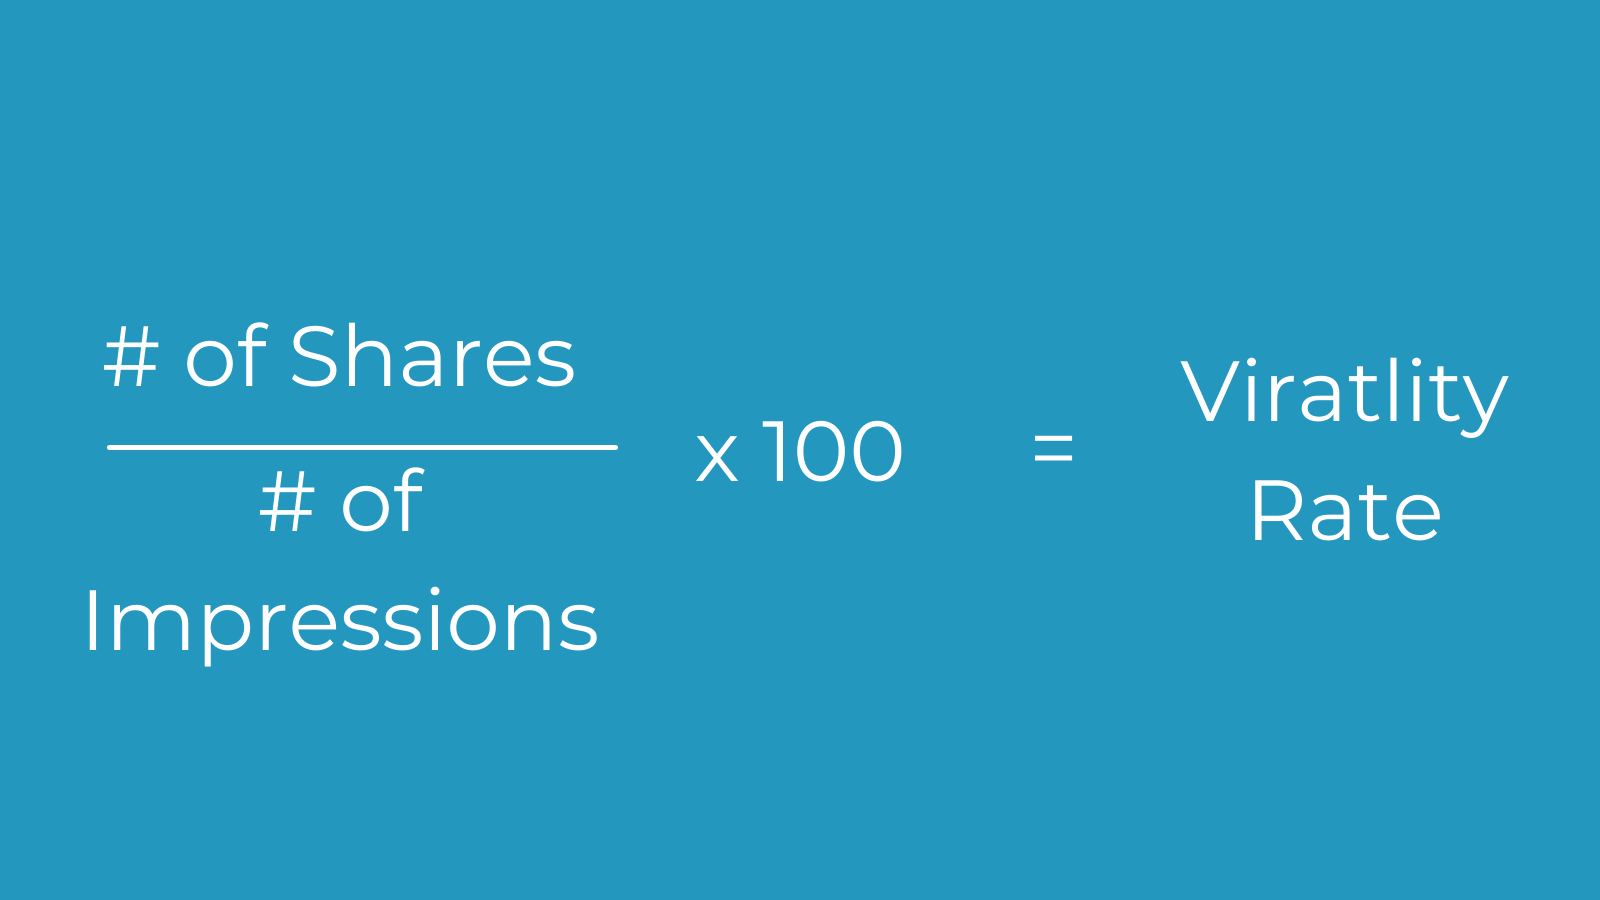 An infographic that reads "number of shares divided by number of impressions times 100 = virality rate"